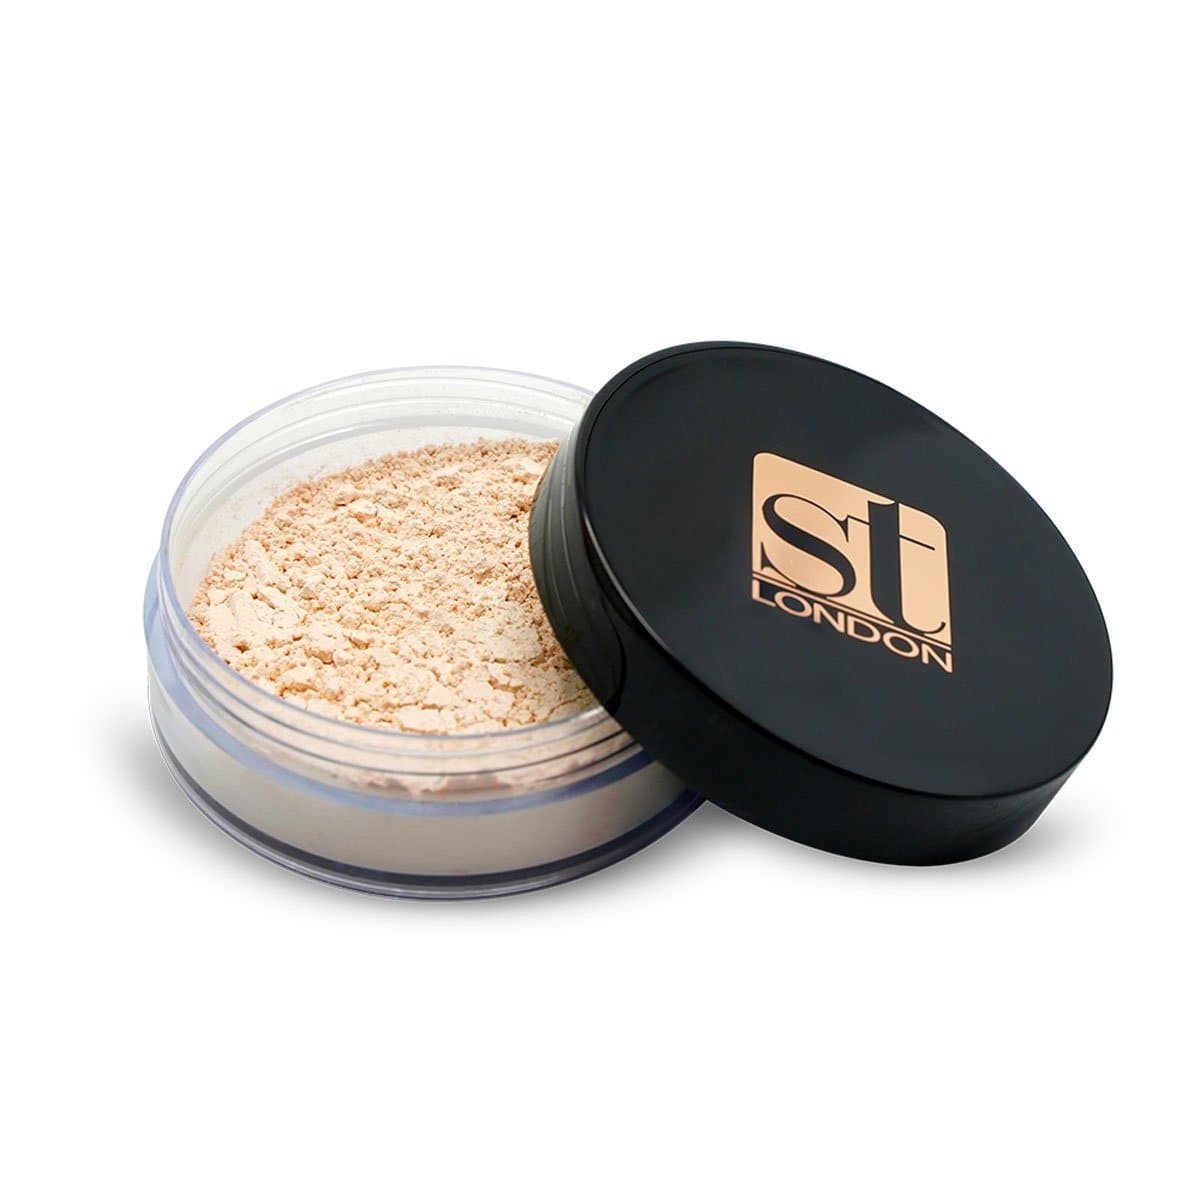 ST London Mineralz Loose Powder - Ivory - Premium Health & Beauty from St London - Just Rs 2640.00! Shop now at Cozmetica